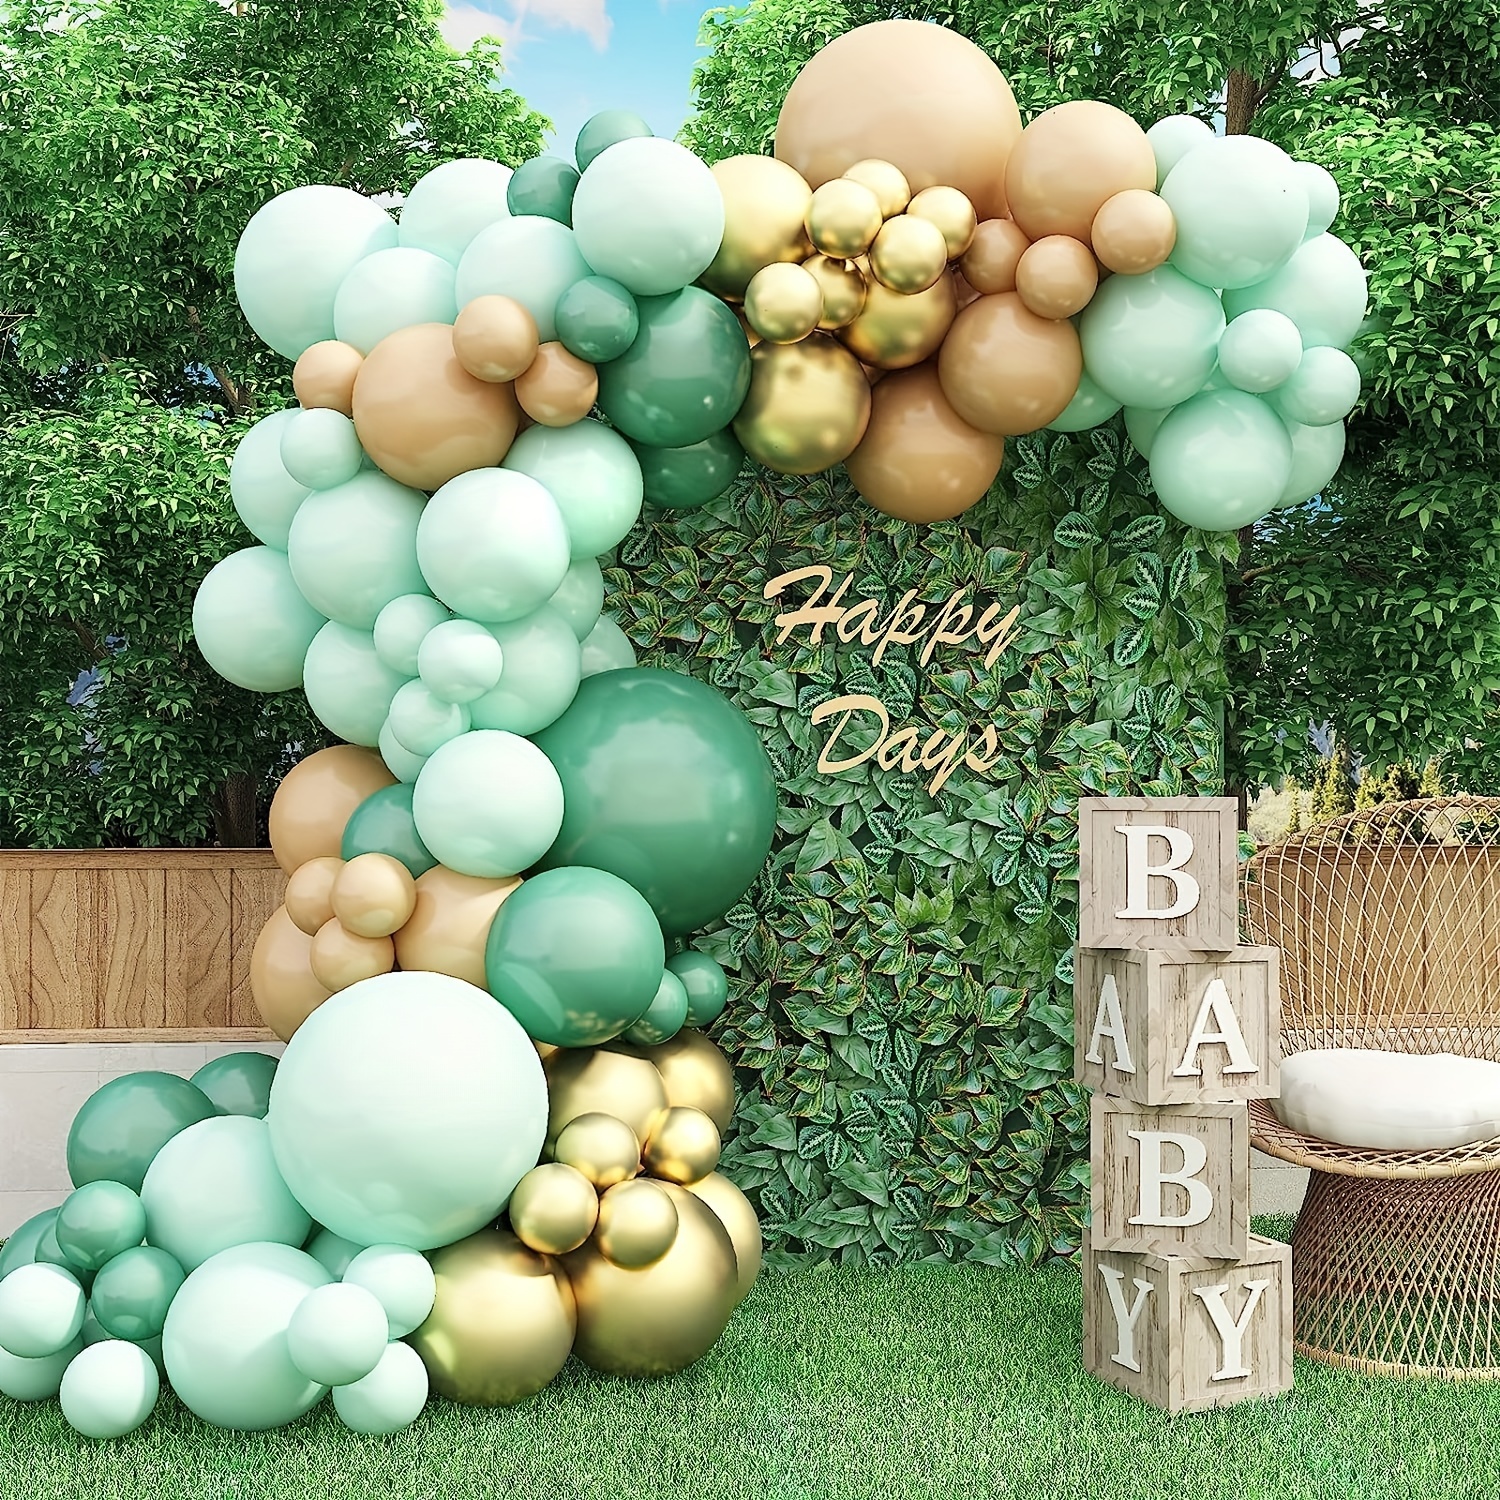 Green and Gold Birthday Party Decorations for Men Women Girls 145pcs  Birthday Party Supplies Green Garland Kit Gold Happy Birthday Banner with  Green